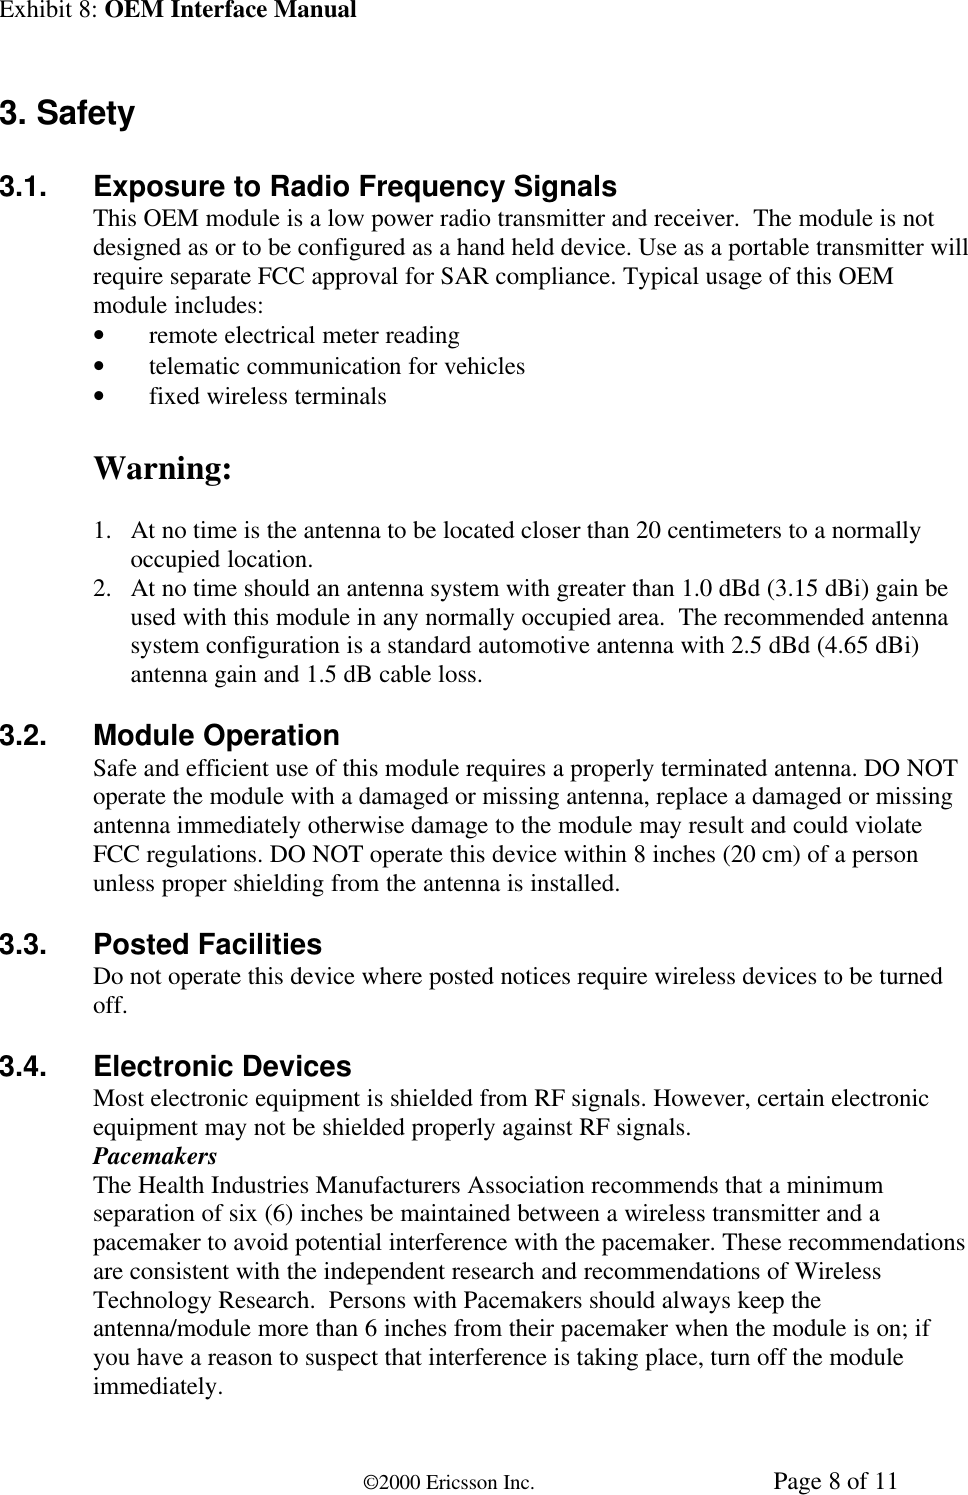 Exhibit 8: OEM Interface Manual©2000 Ericsson Inc. Page 8 of 113. Safety3.1. Exposure to Radio Frequency SignalsThis OEM module is a low power radio transmitter and receiver.  The module is notdesigned as or to be configured as a hand held device. Use as a portable transmitter willrequire separate FCC approval for SAR compliance. Typical usage of this OEMmodule includes:• remote electrical meter reading• telematic communication for vehicles• fixed wireless terminalsWarning:1. At no time is the antenna to be located closer than 20 centimeters to a normallyoccupied location.2. At no time should an antenna system with greater than 1.0 dBd (3.15 dBi) gain beused with this module in any normally occupied area.  The recommended antennasystem configuration is a standard automotive antenna with 2.5 dBd (4.65 dBi)antenna gain and 1.5 dB cable loss.3.2. Module OperationSafe and efficient use of this module requires a properly terminated antenna. DO NOToperate the module with a damaged or missing antenna, replace a damaged or missingantenna immediately otherwise damage to the module may result and could violateFCC regulations. DO NOT operate this device within 8 inches (20 cm) of a personunless proper shielding from the antenna is installed.3.3. Posted FacilitiesDo not operate this device where posted notices require wireless devices to be turnedoff.3.4. Electronic DevicesMost electronic equipment is shielded from RF signals. However, certain electronicequipment may not be shielded properly against RF signals.PacemakersThe Health Industries Manufacturers Association recommends that a minimumseparation of six (6) inches be maintained between a wireless transmitter and apacemaker to avoid potential interference with the pacemaker. These recommendationsare consistent with the independent research and recommendations of WirelessTechnology Research.  Persons with Pacemakers should always keep theantenna/module more than 6 inches from their pacemaker when the module is on; ifyou have a reason to suspect that interference is taking place, turn off the moduleimmediately.